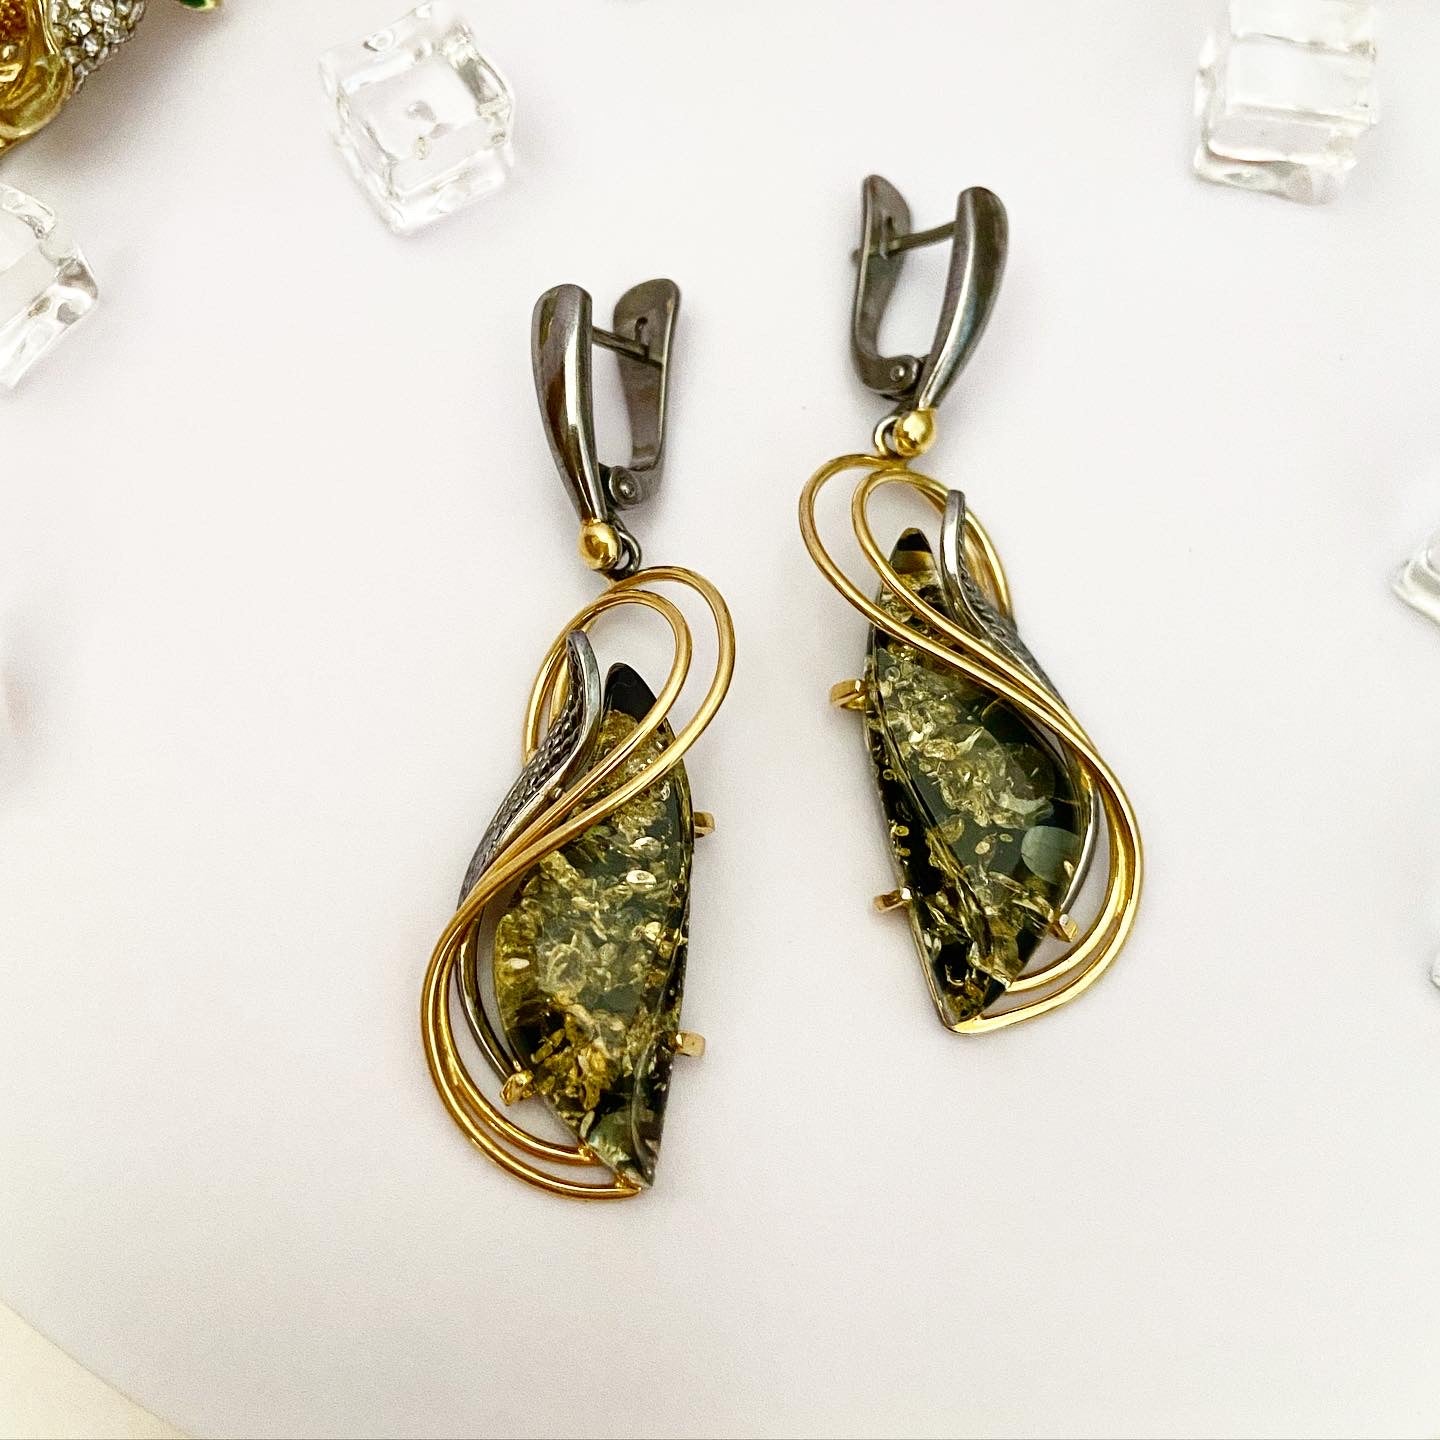 Earrings with green amber